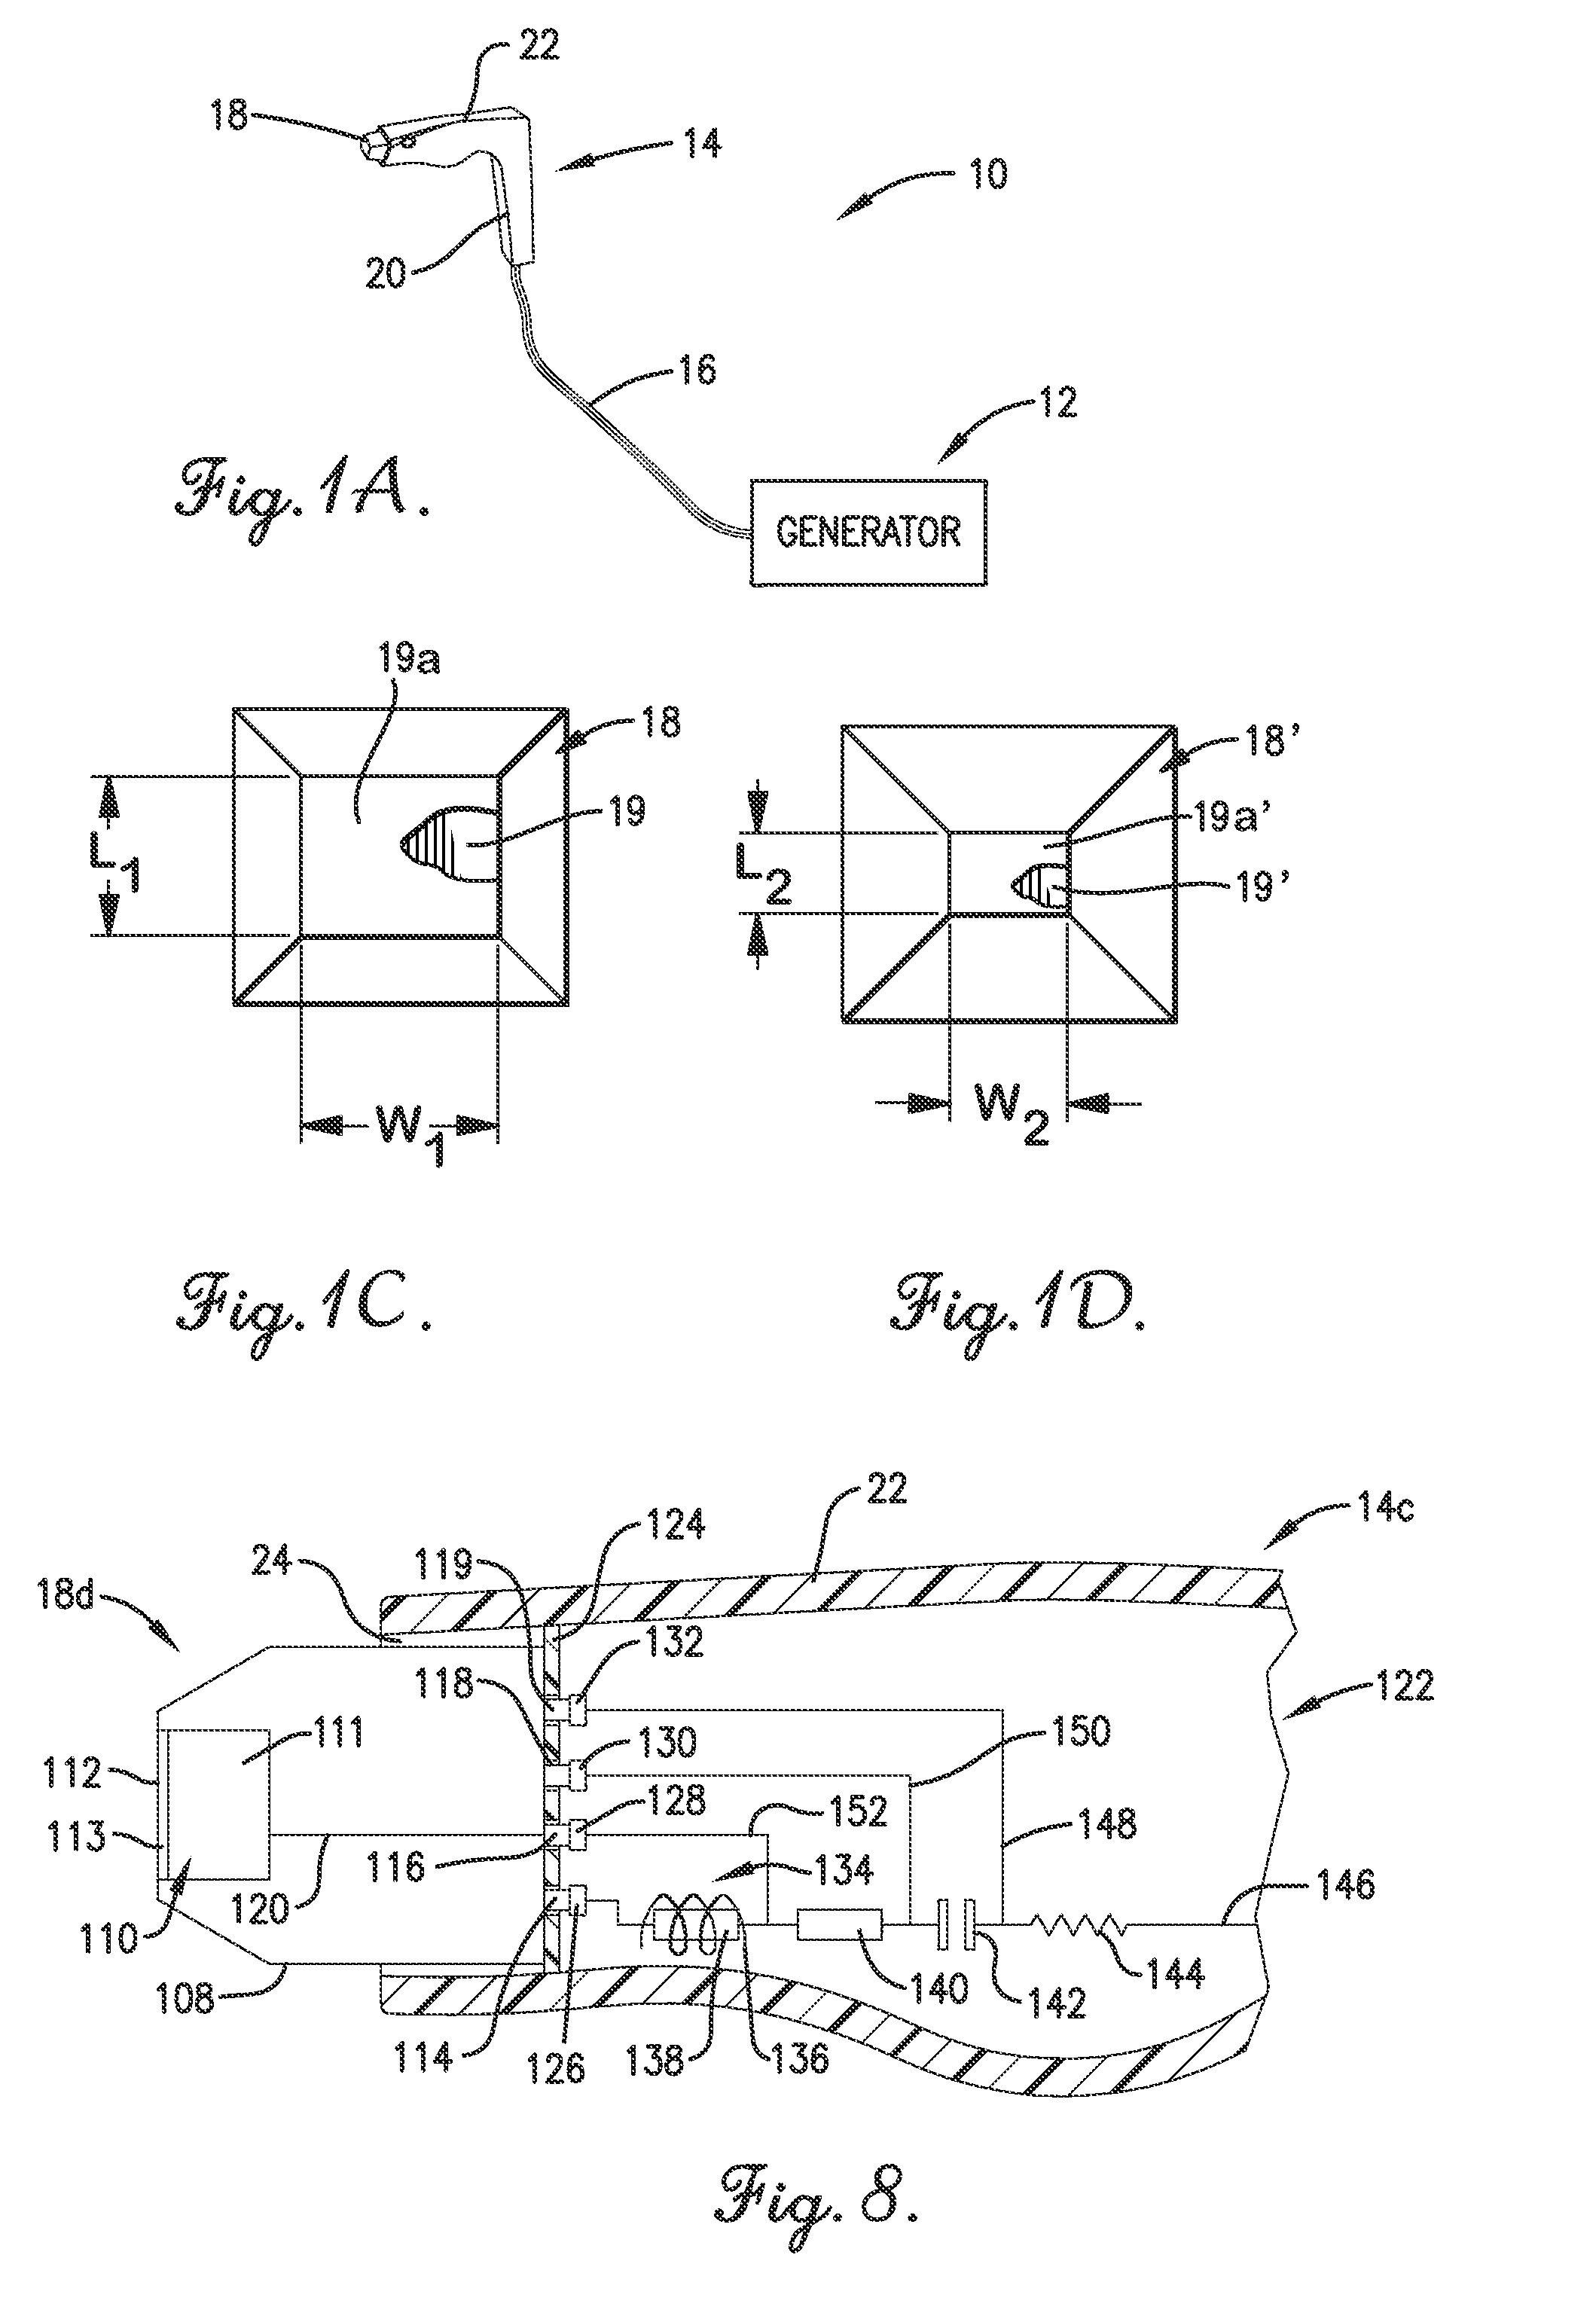 Electrode assembly and handpiece with adjustable system impedance, and methods of operating an energy-based medical system to treat tissue